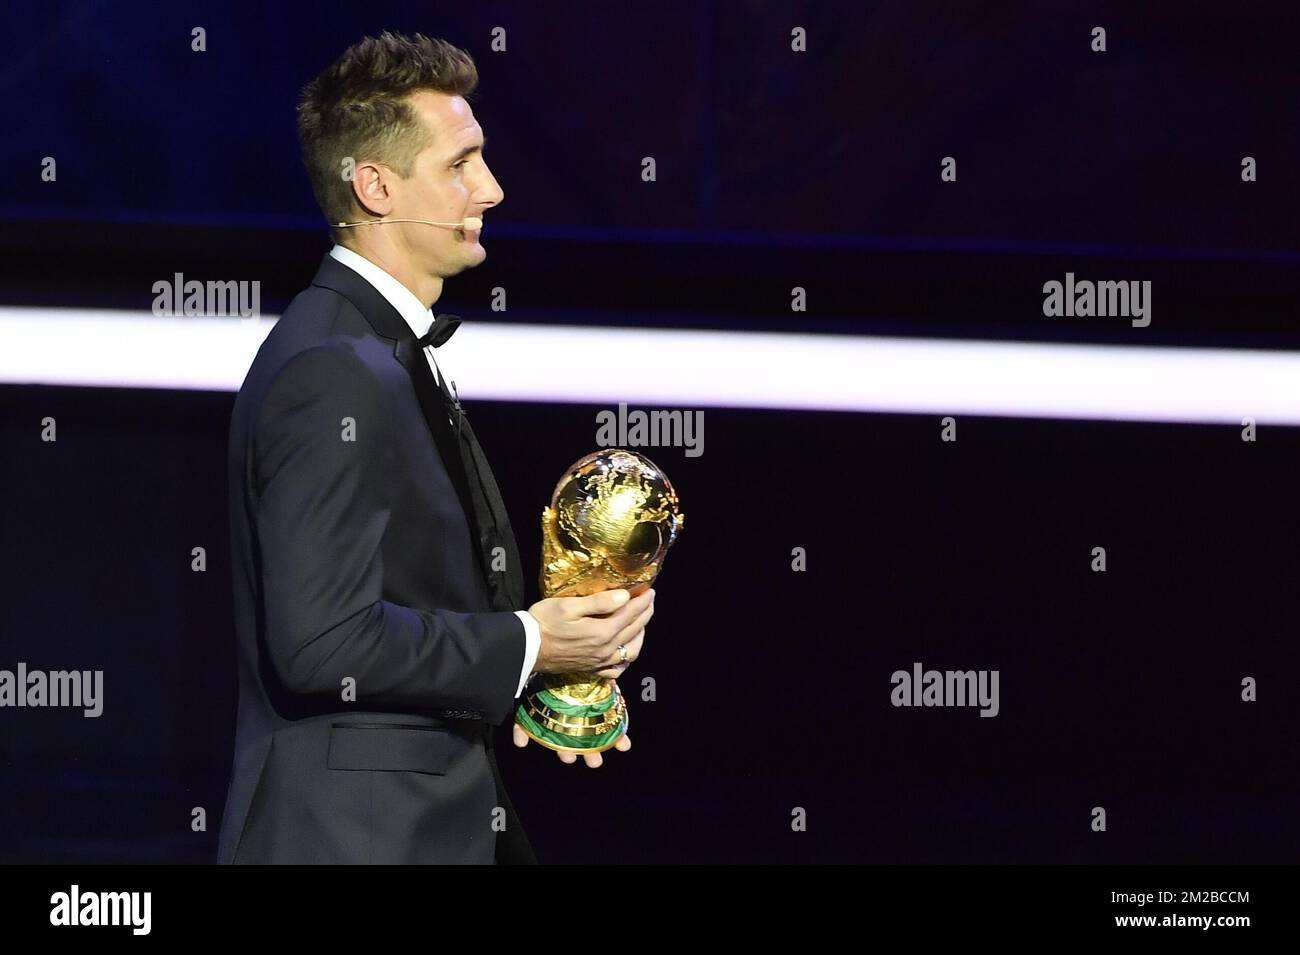 Former German soccer player Miroslav Klose holds the 2018 World Cup trophy during the draw for the 2018 World Cup soccer in Moscow, with Belgium team in pot one, Russia, Friday 01 December 2017. BELGA PHOTO DIRK WAEM  Stock Photo